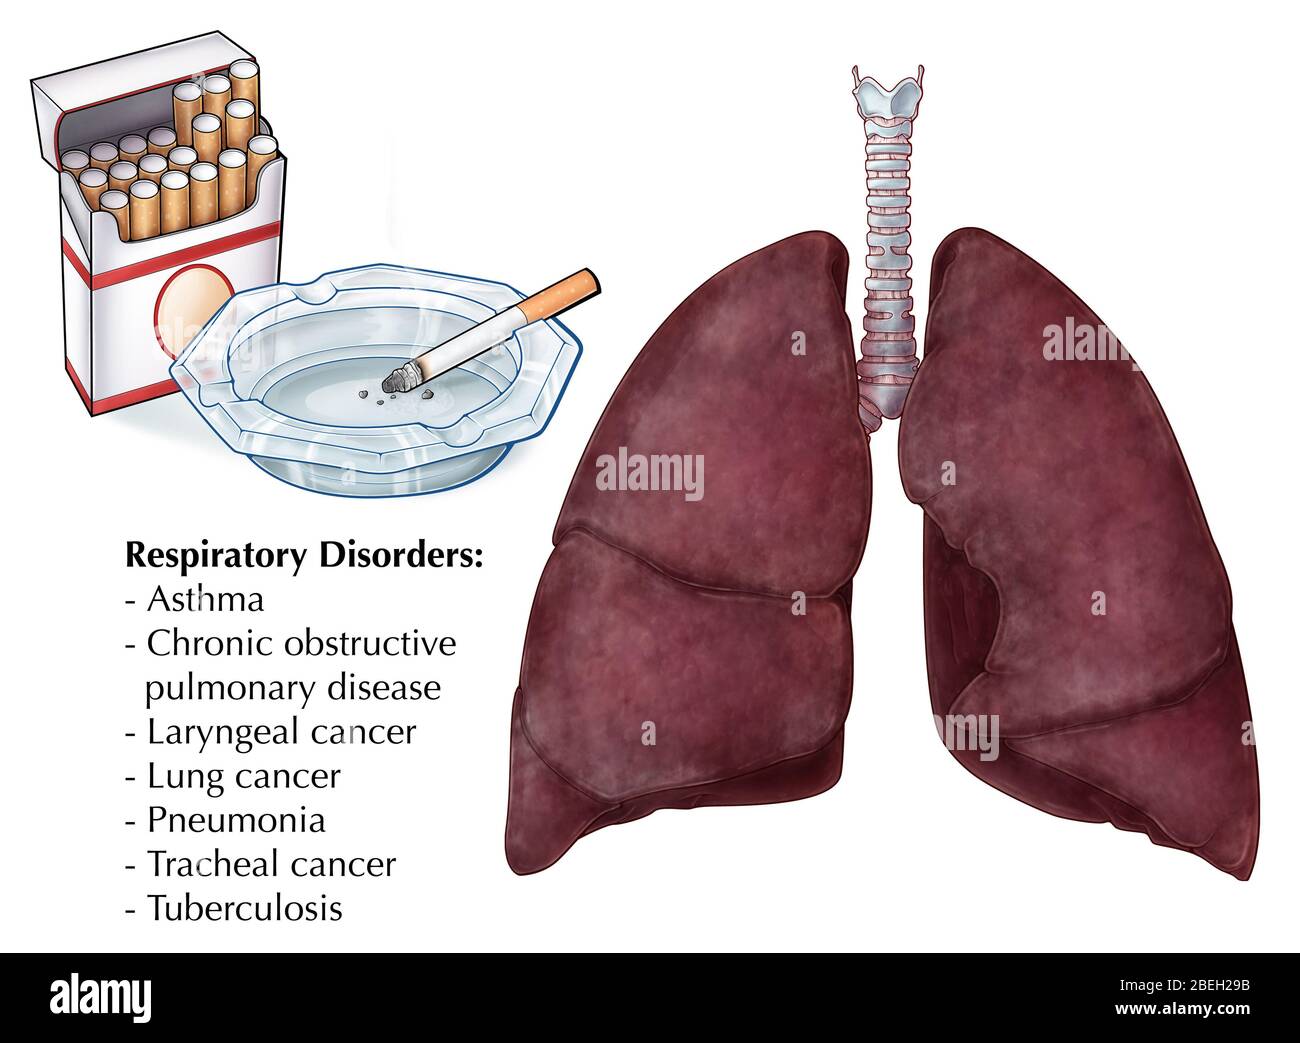 An illustration depicting cigarettes and a pair of lungs affected by smoking. A number of respiratory disorders are causally linked to smoking, including asthma, chronic obstructive pulmonary disease, laryngeal cancer, lung cancer, pneumonia, tracheal cancer, and tuberculosis. The lungs can develop a dark or decayed appearance due to the accumulation and exposure to tar and other chemicals found in cigarettes. Stock Photo